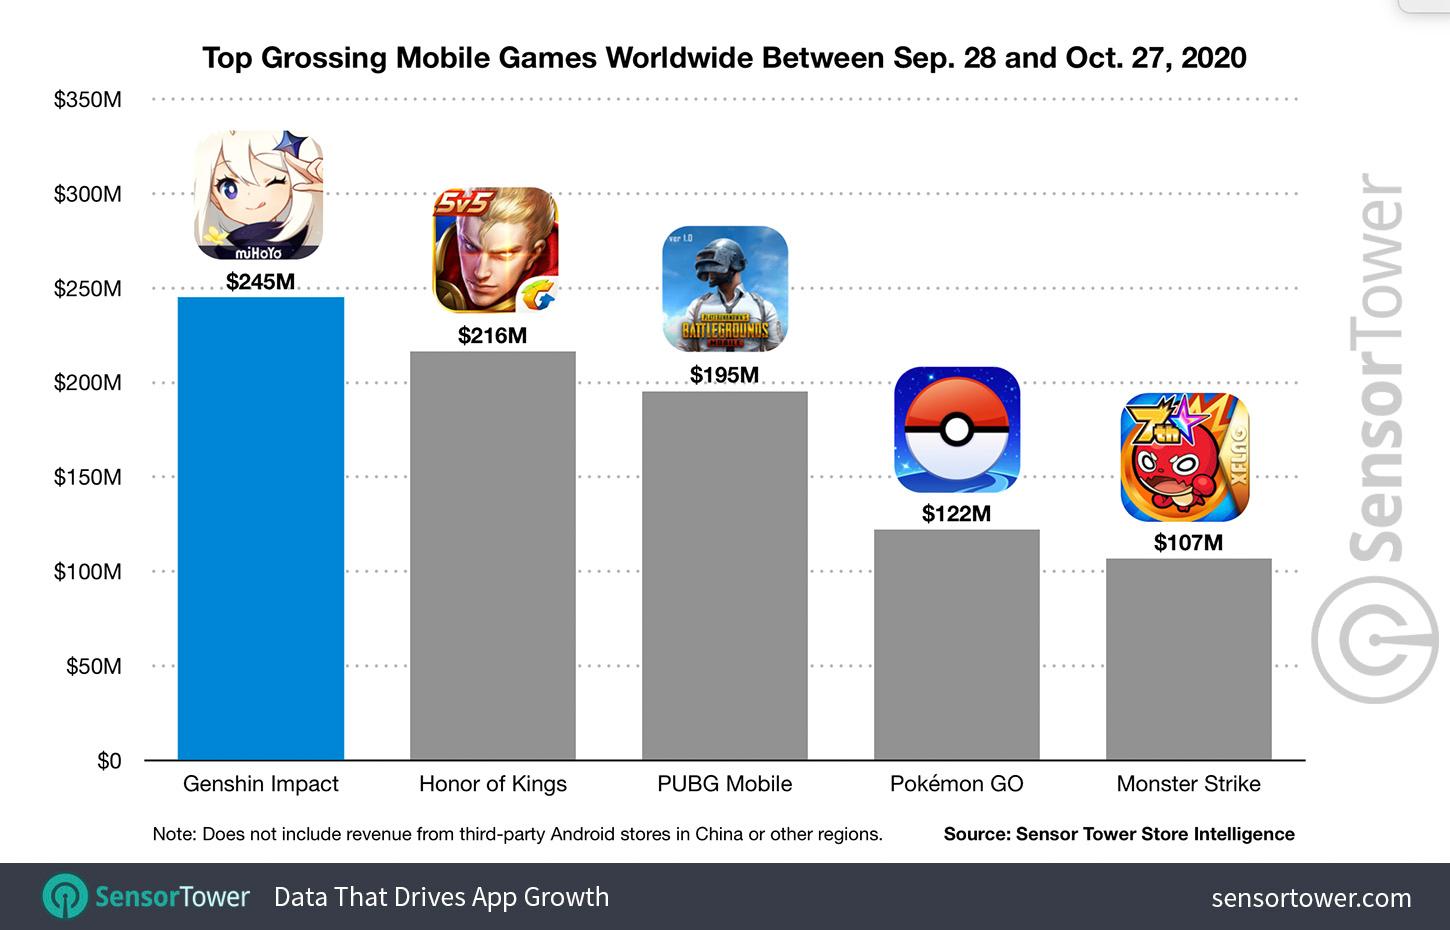 Graph from Sensor Tower showing top grossing mobile game worldwide between Sep 28 and Oct 27 2020